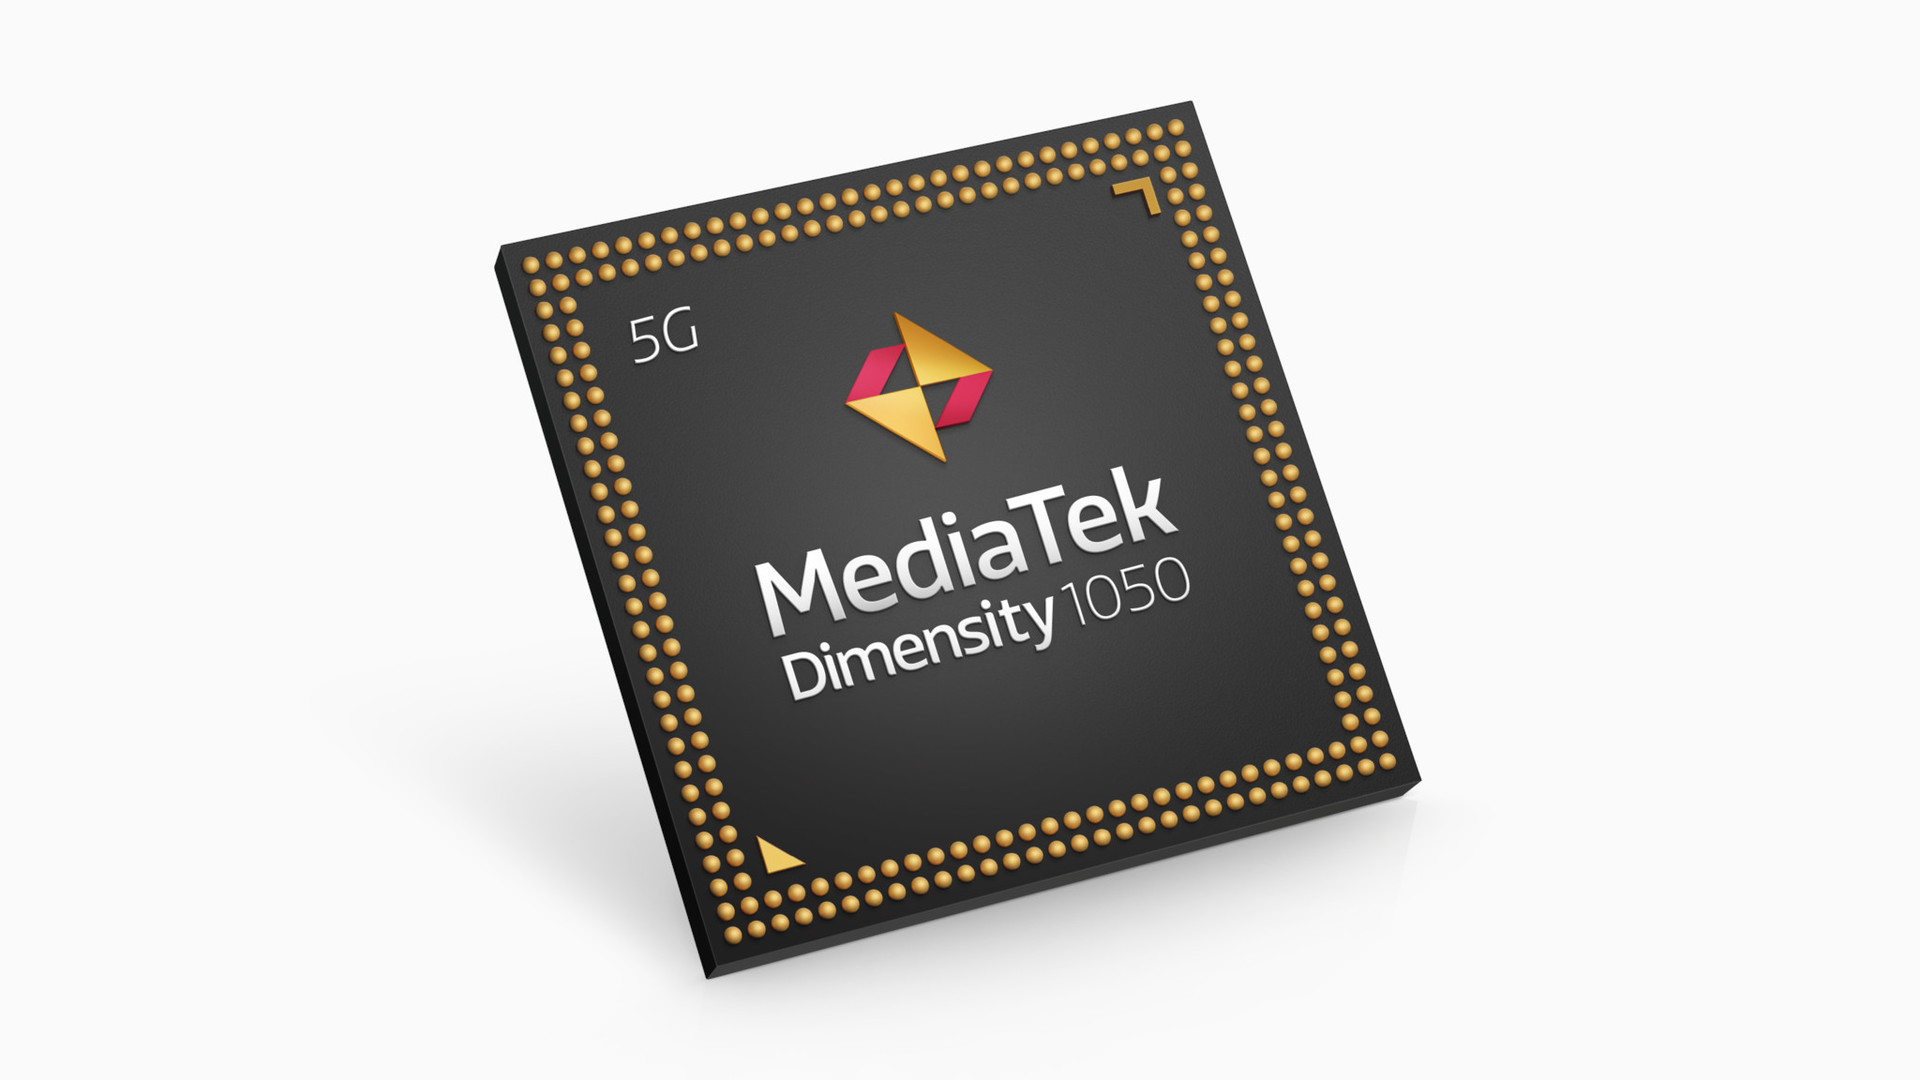 MediaTek’s first mmWave 5G chipset, the Dimensity 1050 offers seamless connectivity for 5G smartphones